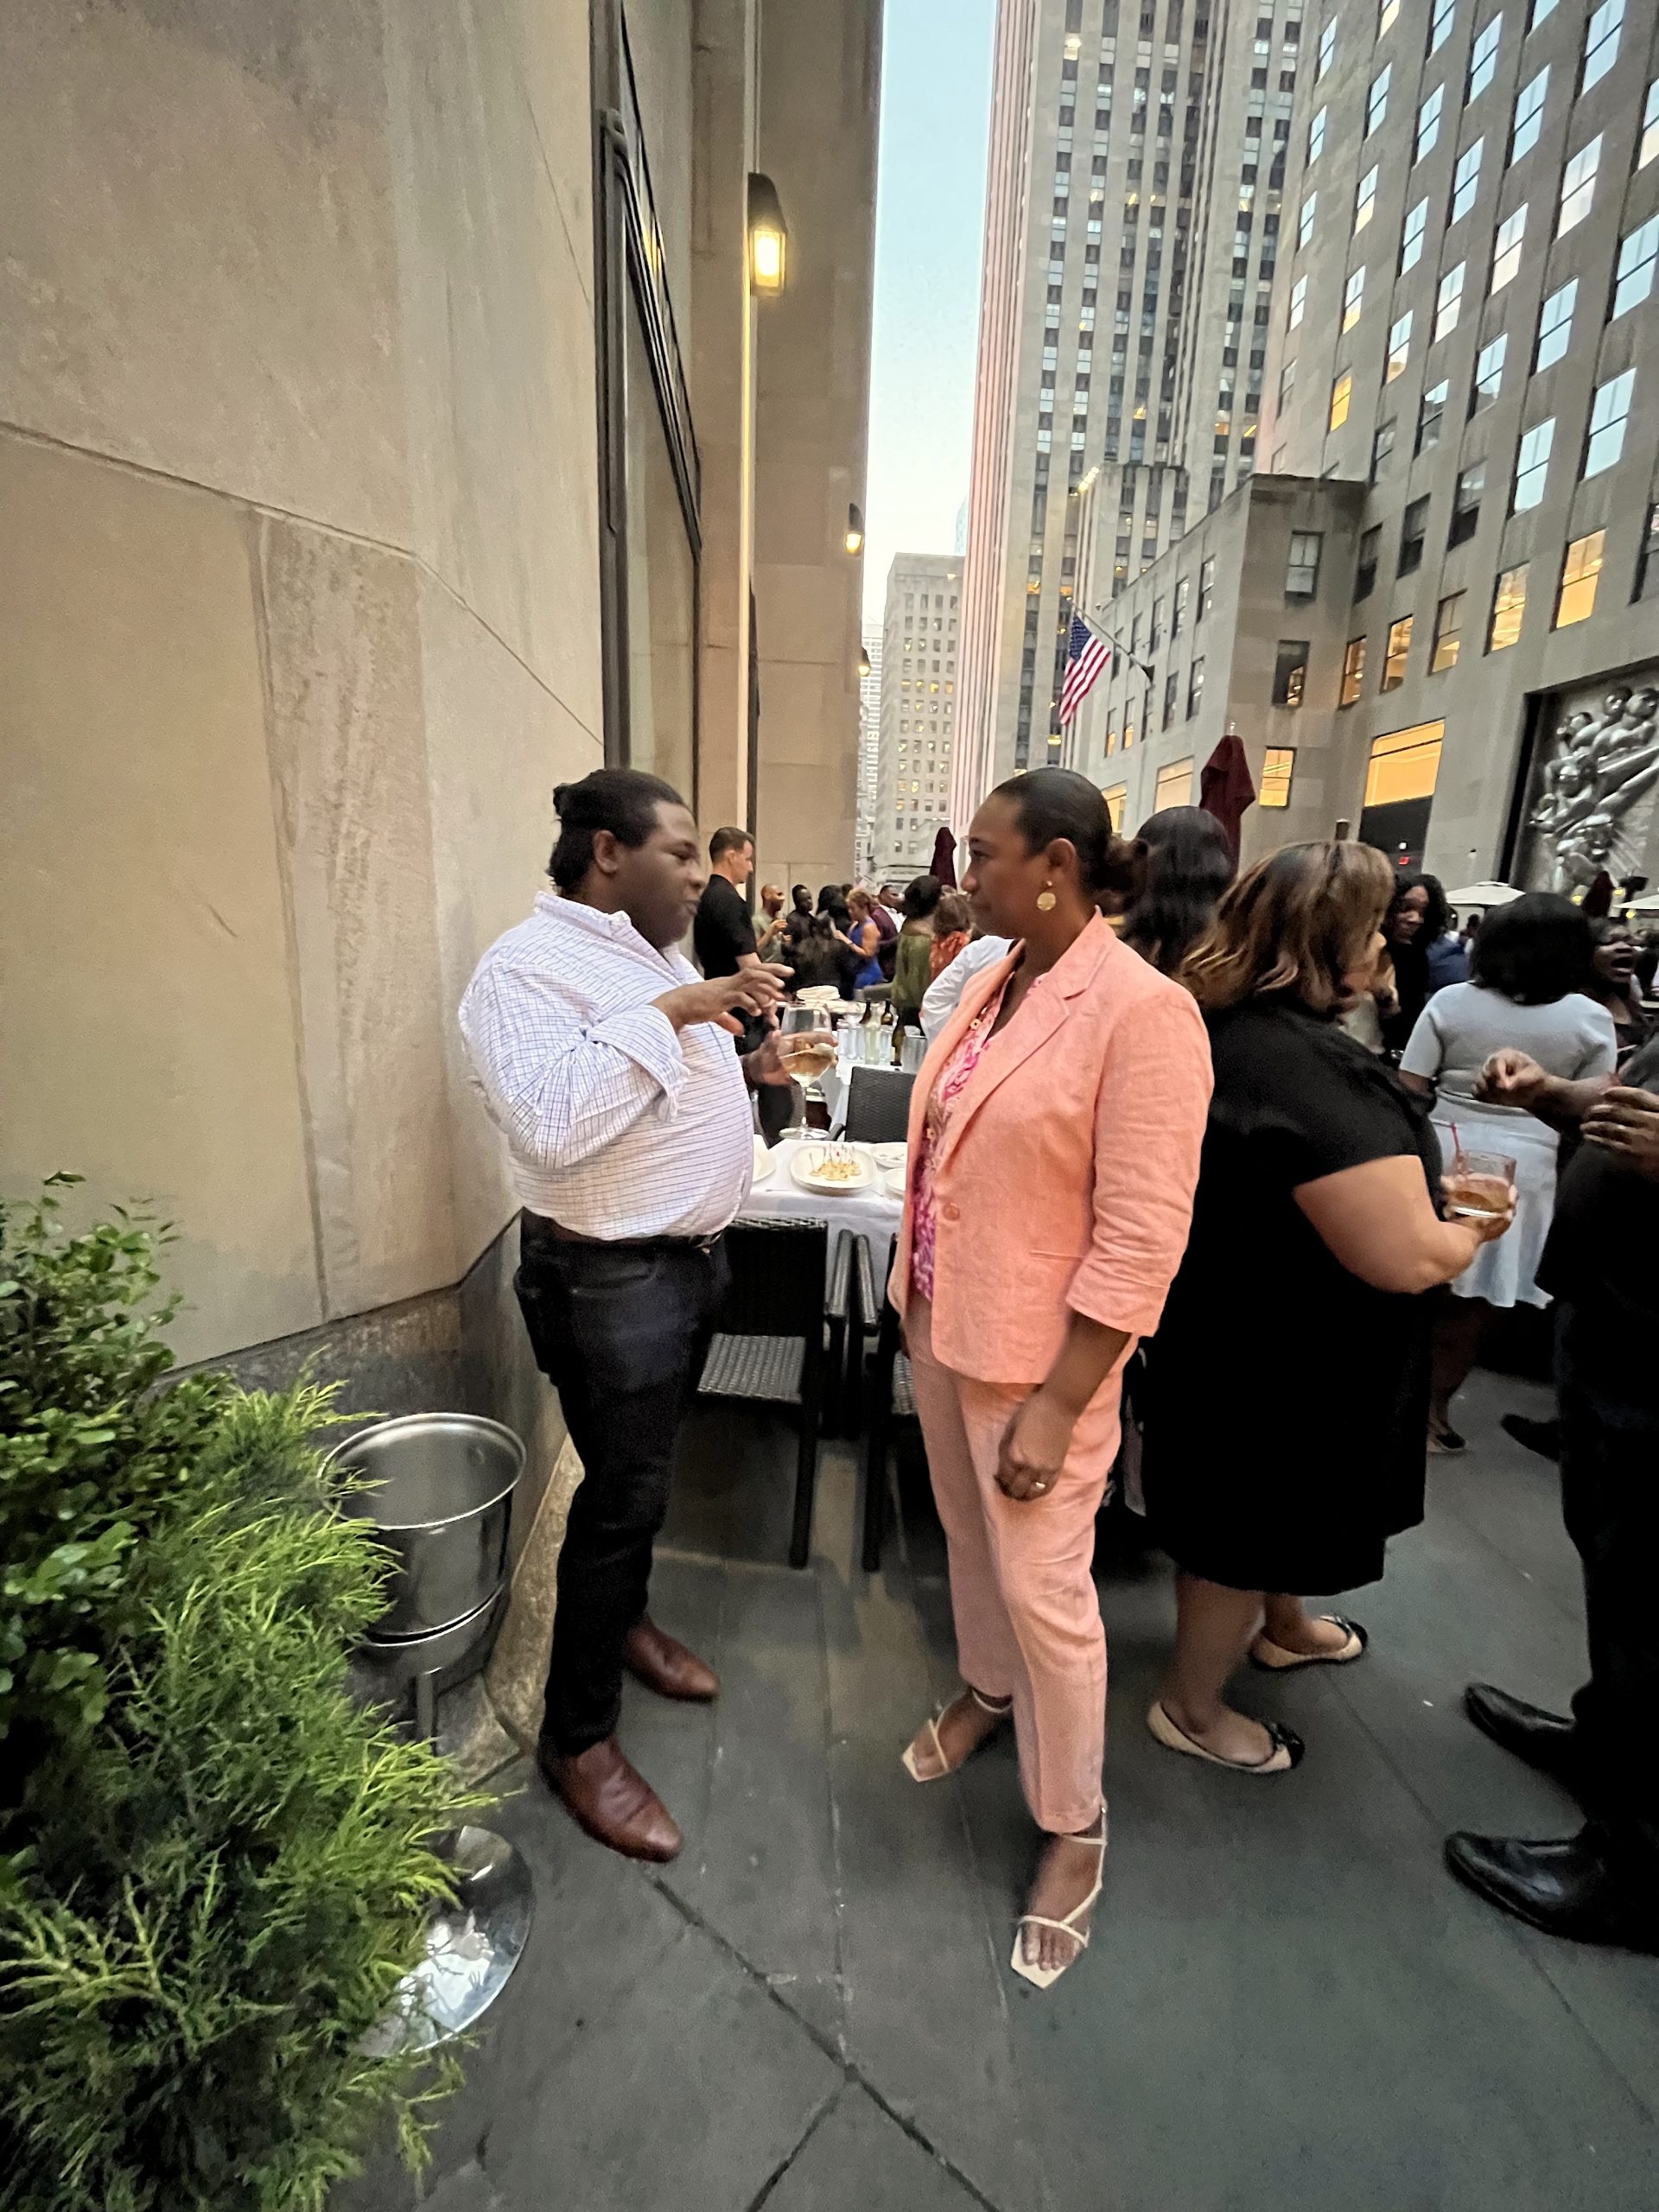 Mrs. Pamela Martin, Chairman of the Nevis Tourism Authority’s Board of Directors, interacting with guests at the “Brown Folks Connect” event at the Limani Restaurant at Rockefeller Plaza in Manhattan, New York on May 11, 2023